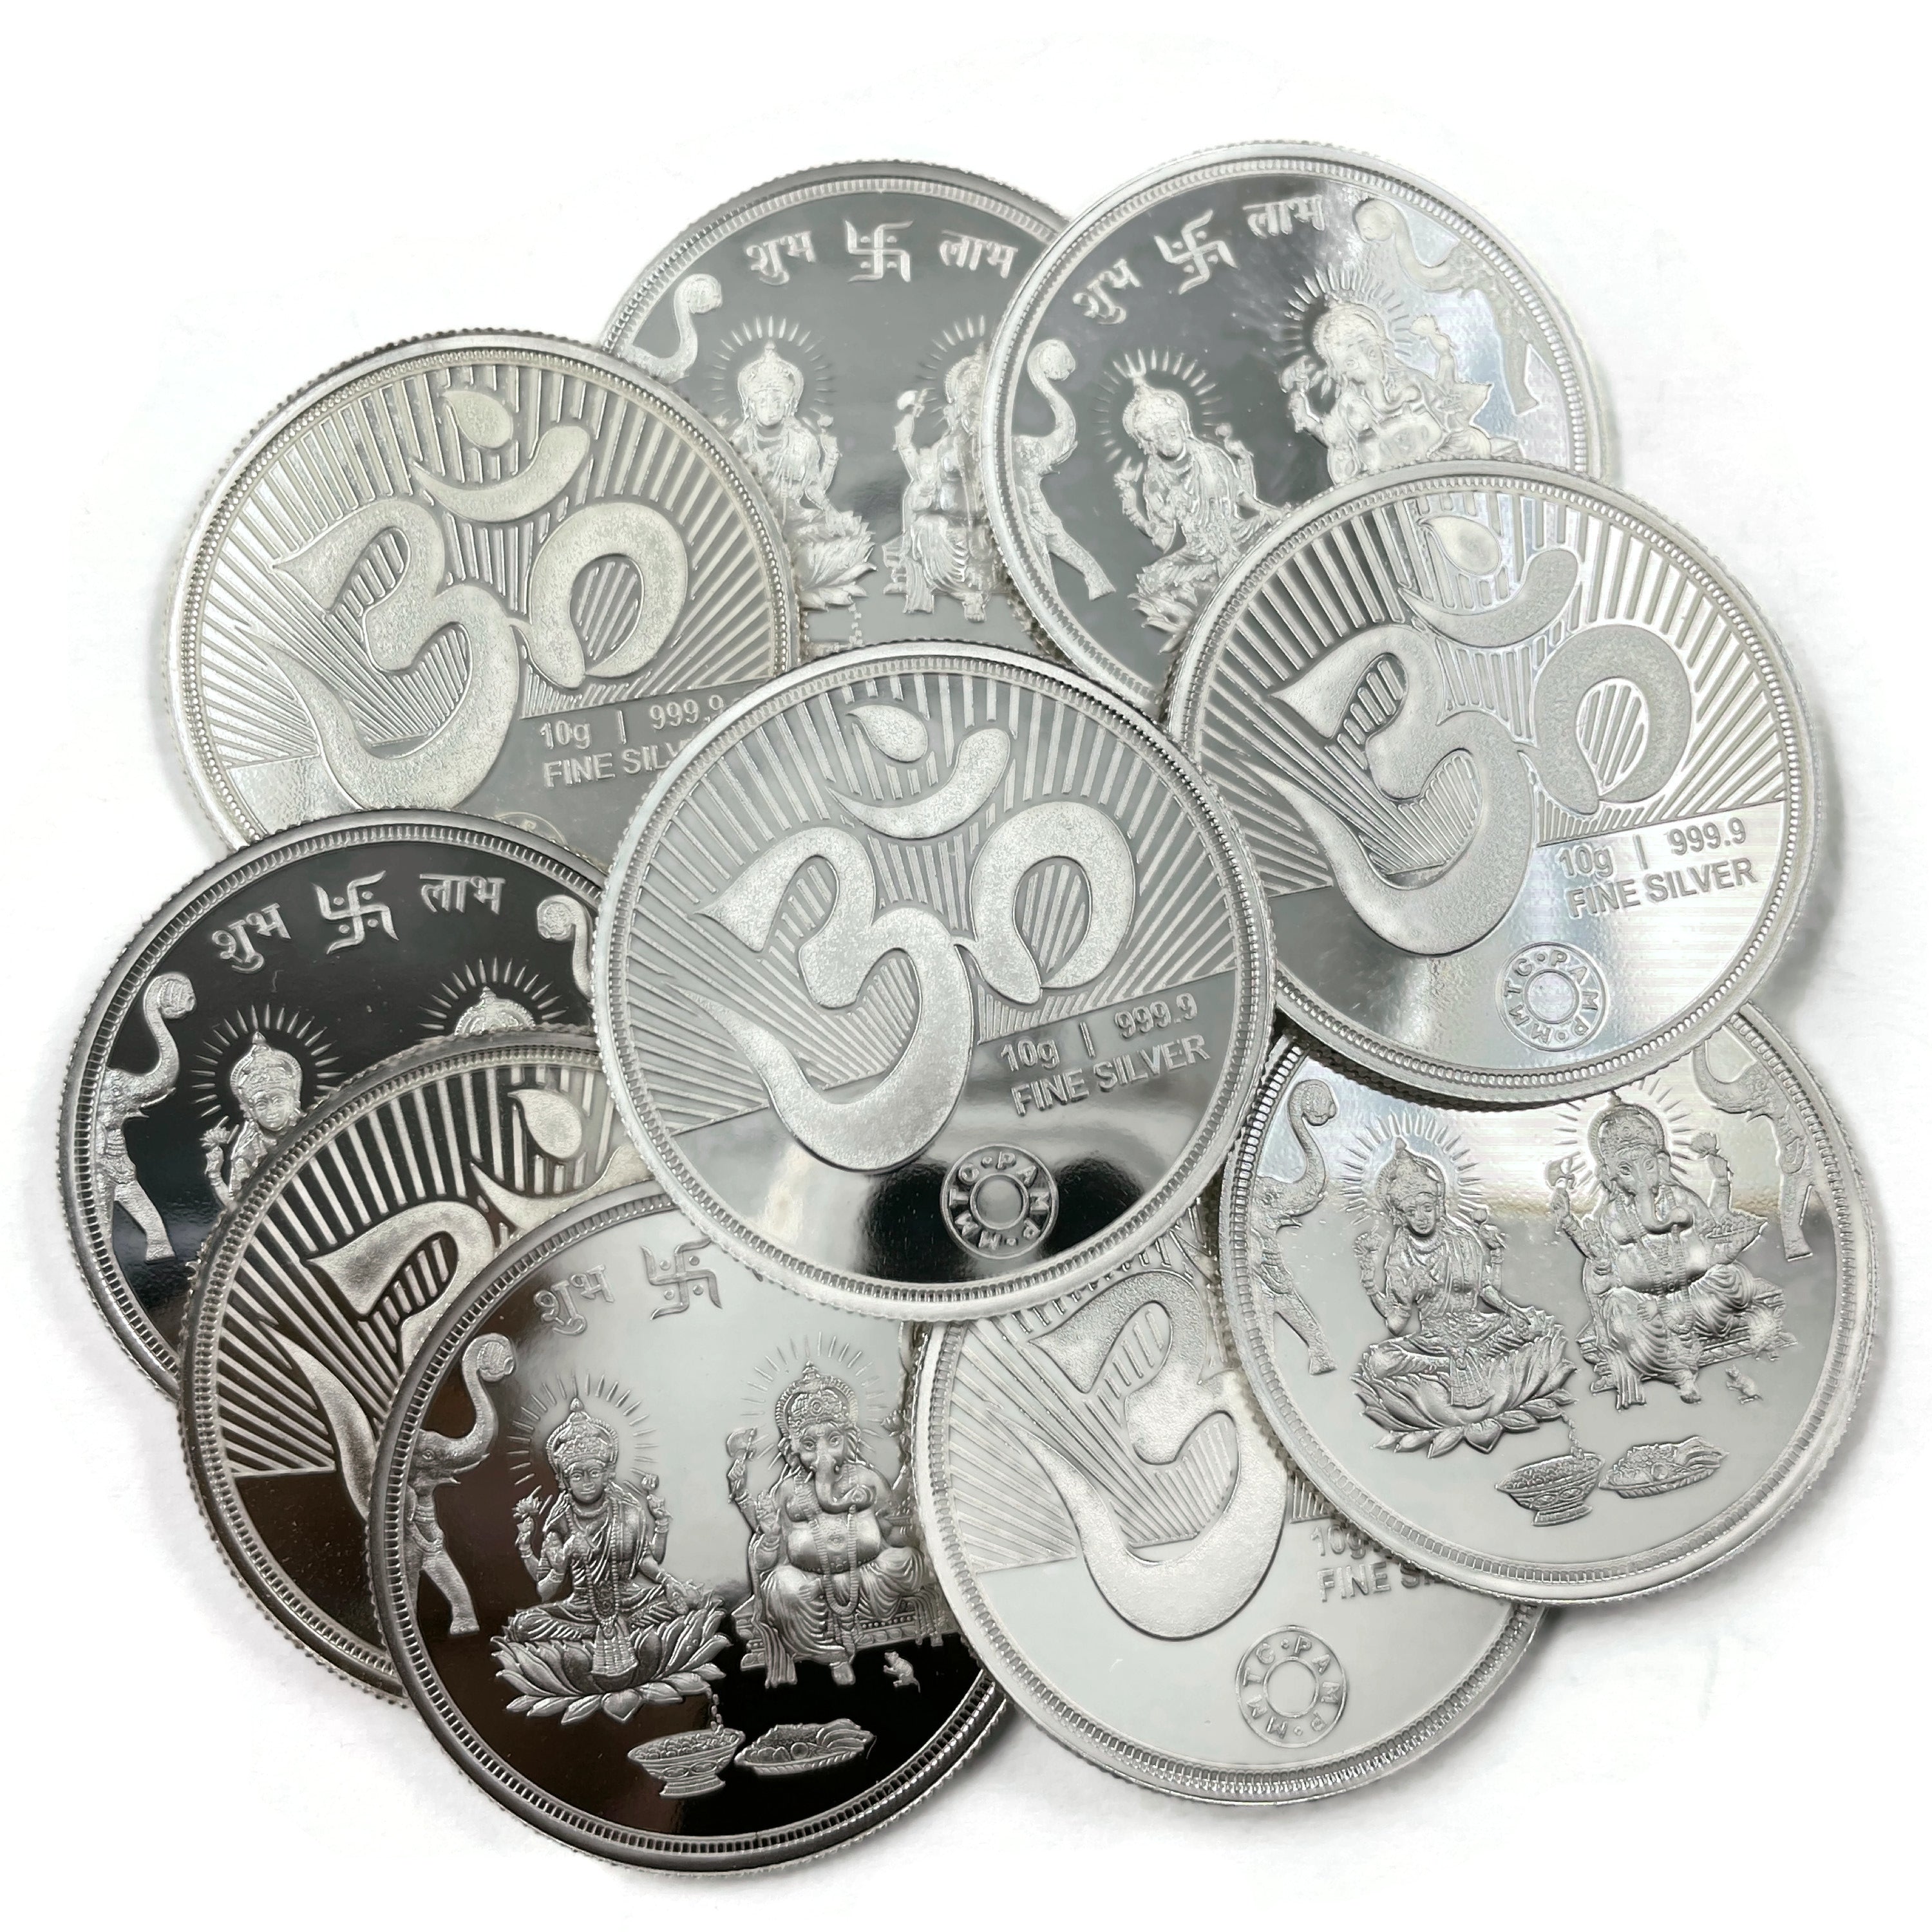  2020 IN 999 Ganesha Lakshmi/Laxmi Solid Pure Silver Ten Gram Coin  Silver Perfect Uncirculated : Everything Else